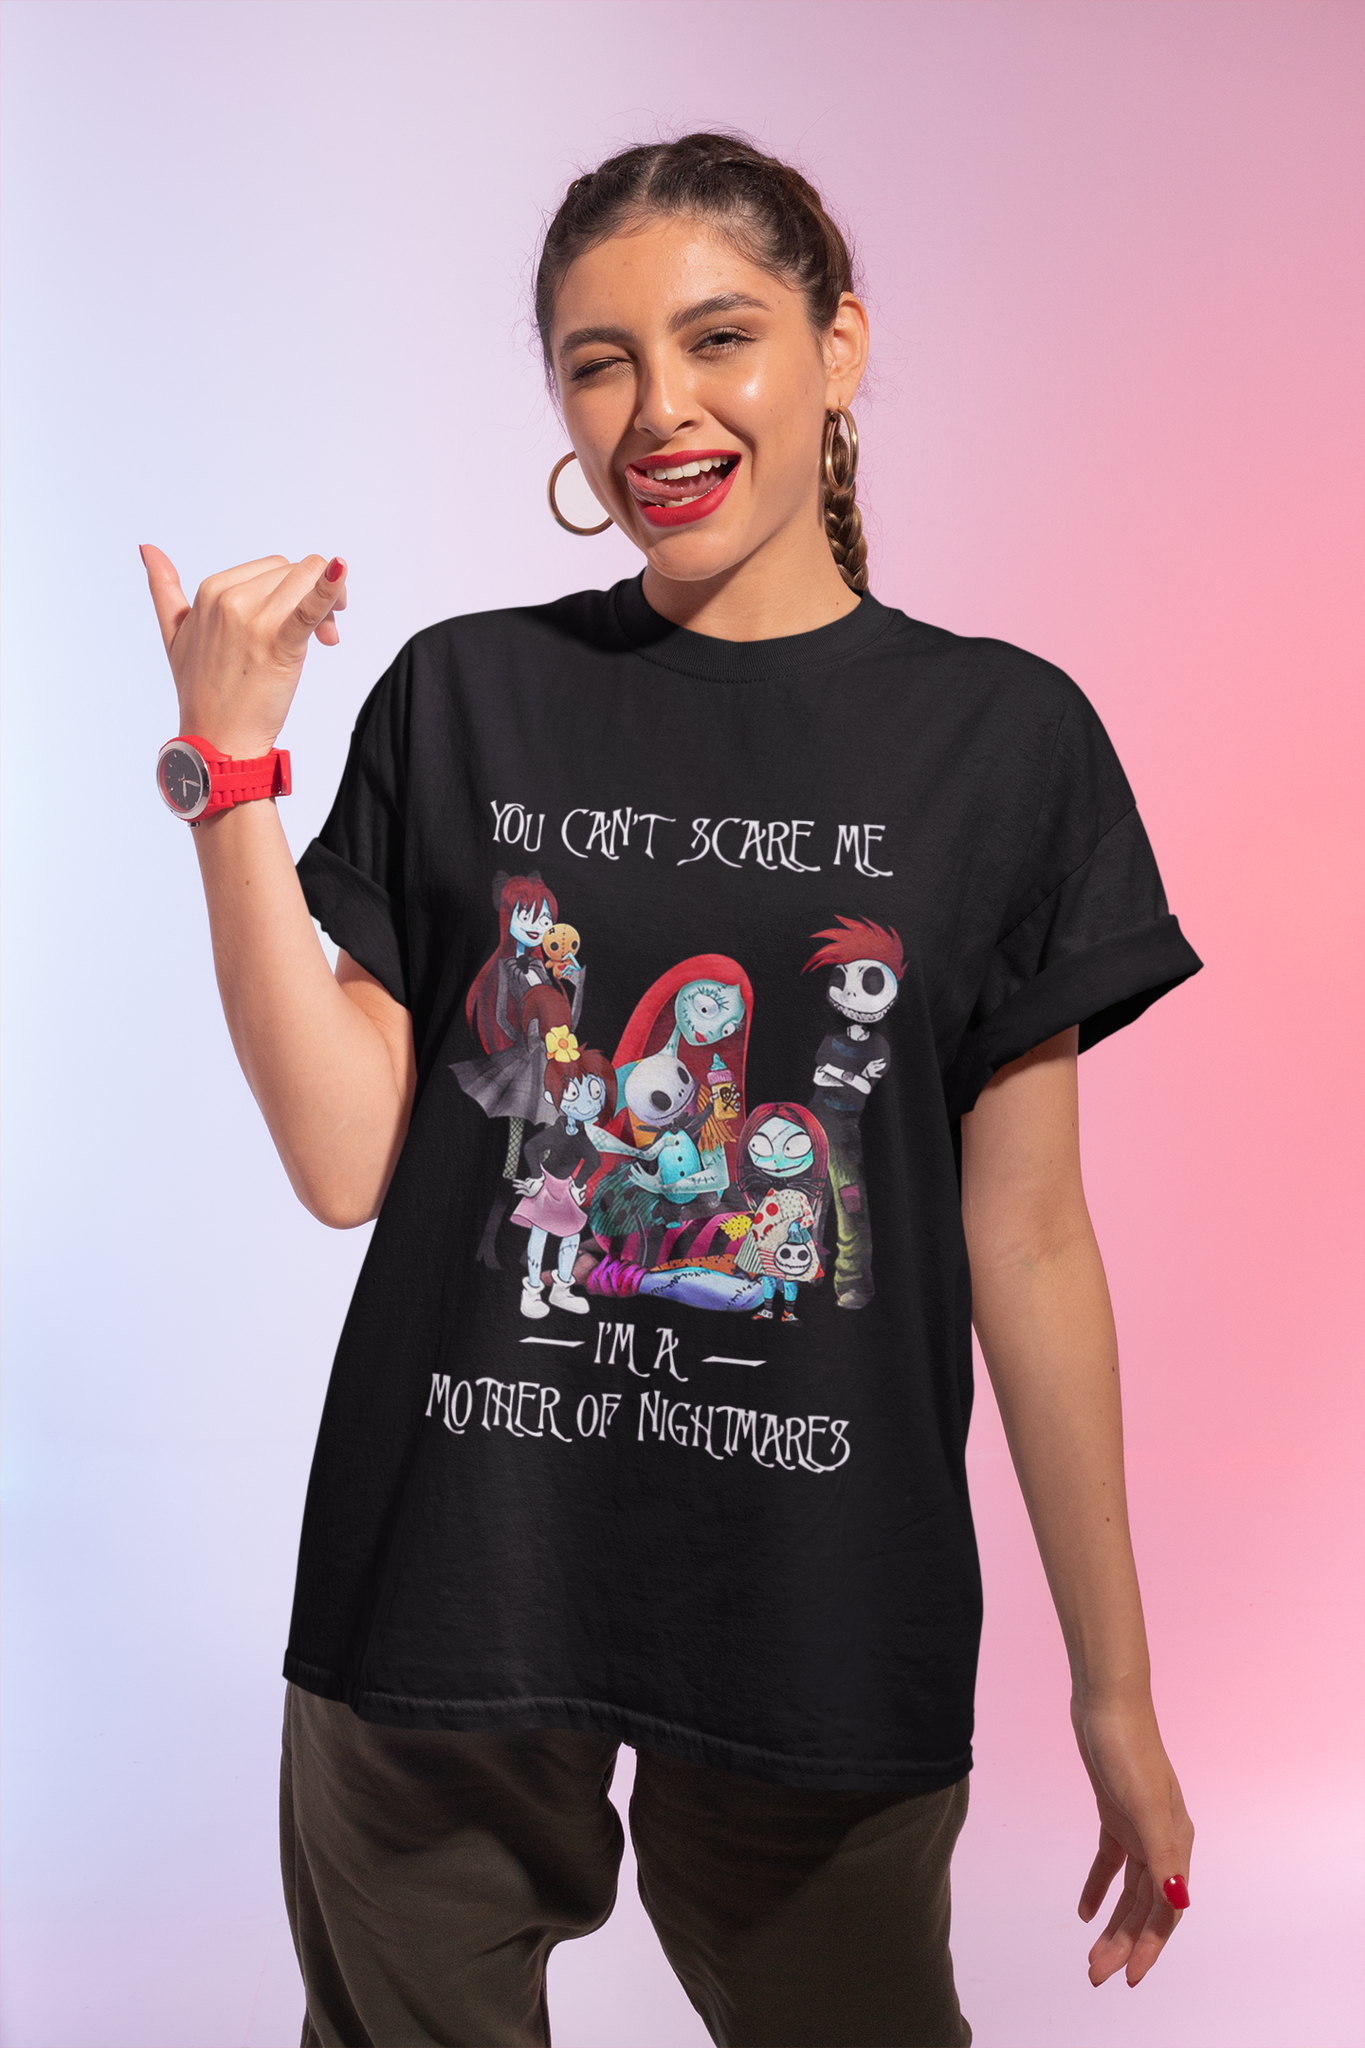 Nightmare Before Christmas T Shirt, Im A Mother Of Nightmares Tshirt, Sally And Children T Shirt, Mothers Day Gifts